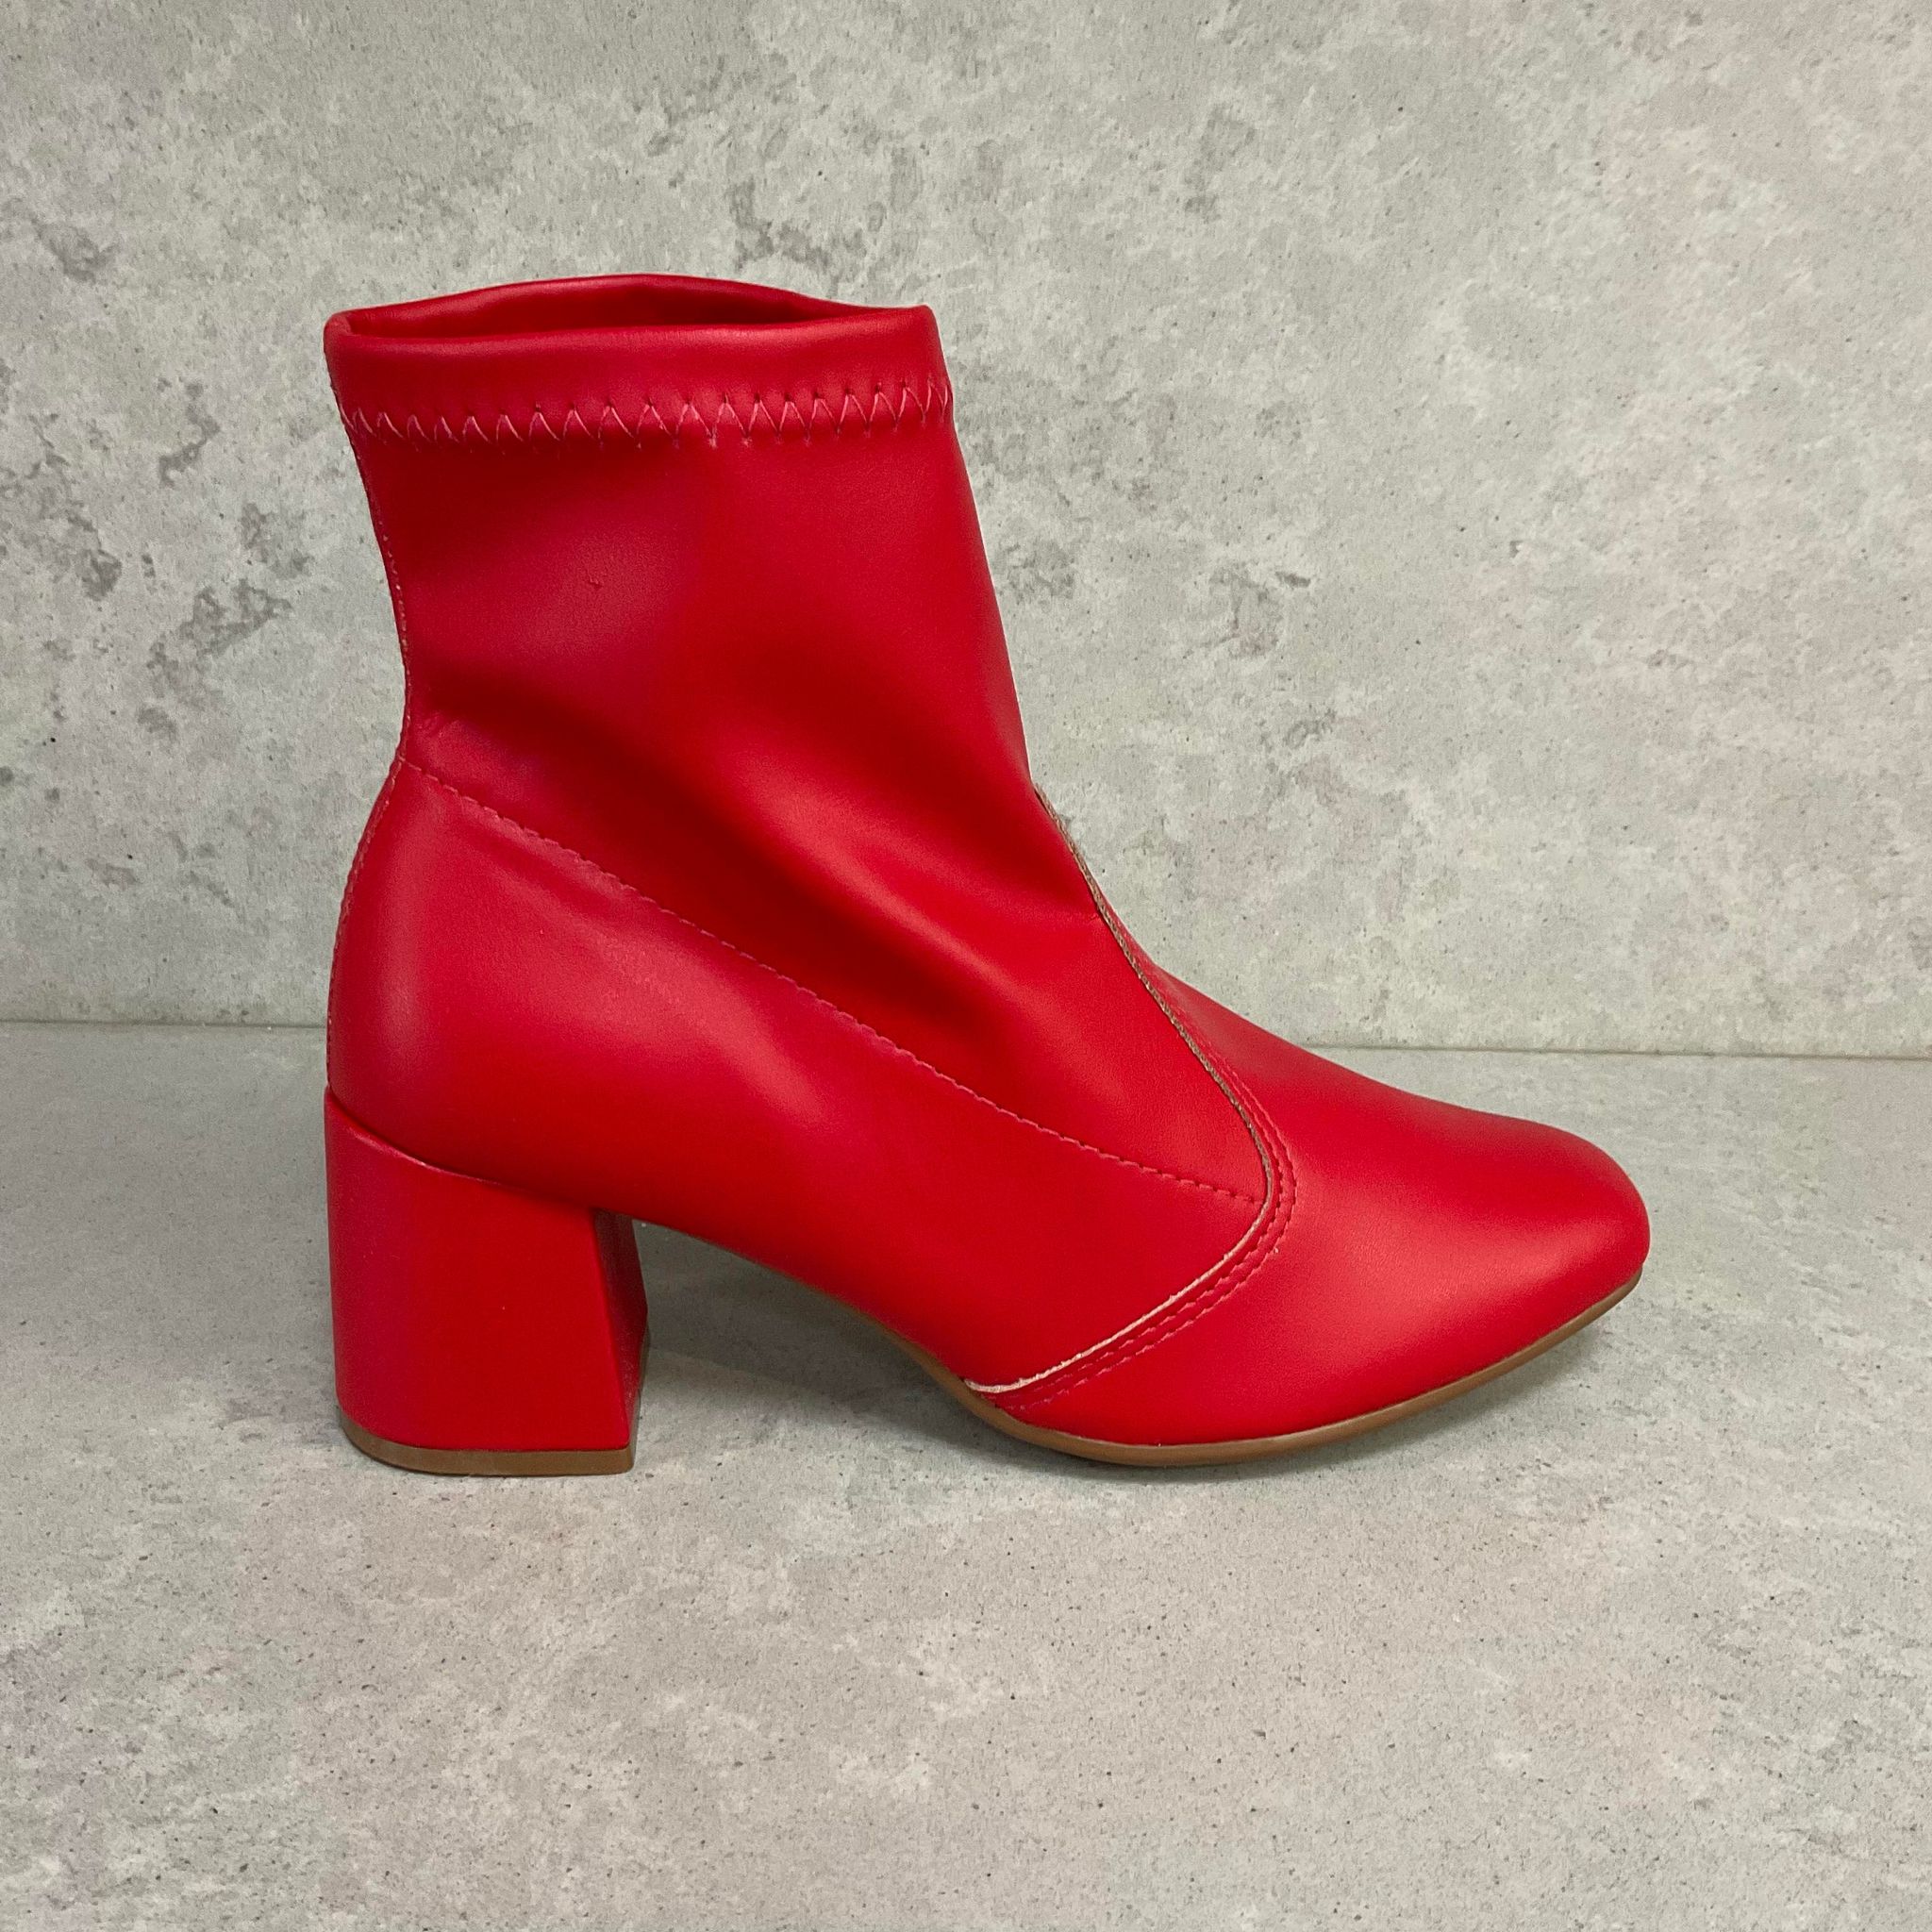 Beira Rio 9076-100 Block Heel Ankle Boot in Red Napa Stretch